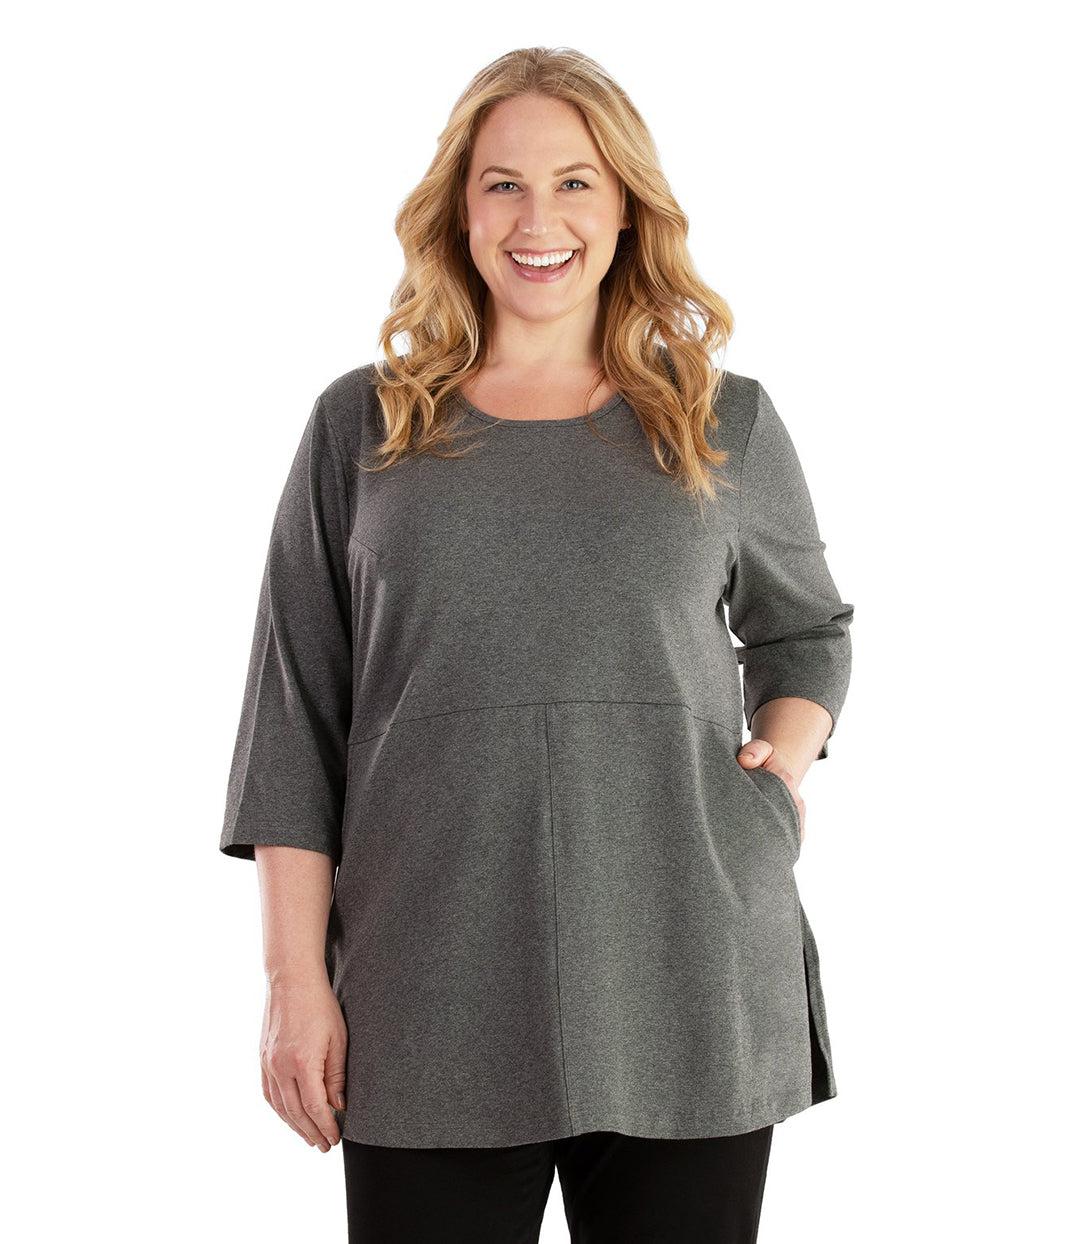 Plus size woman, facing front, wearing JunoActive plus size Stretch Naturals Empire Tunic with Pockets in the color Heather Charcoal. Her left hand is in the tunic pocket at her waist level. Her right hand hangs naturally at her side. She is wearing JunoActive Plus Size Leggings in the color Black.